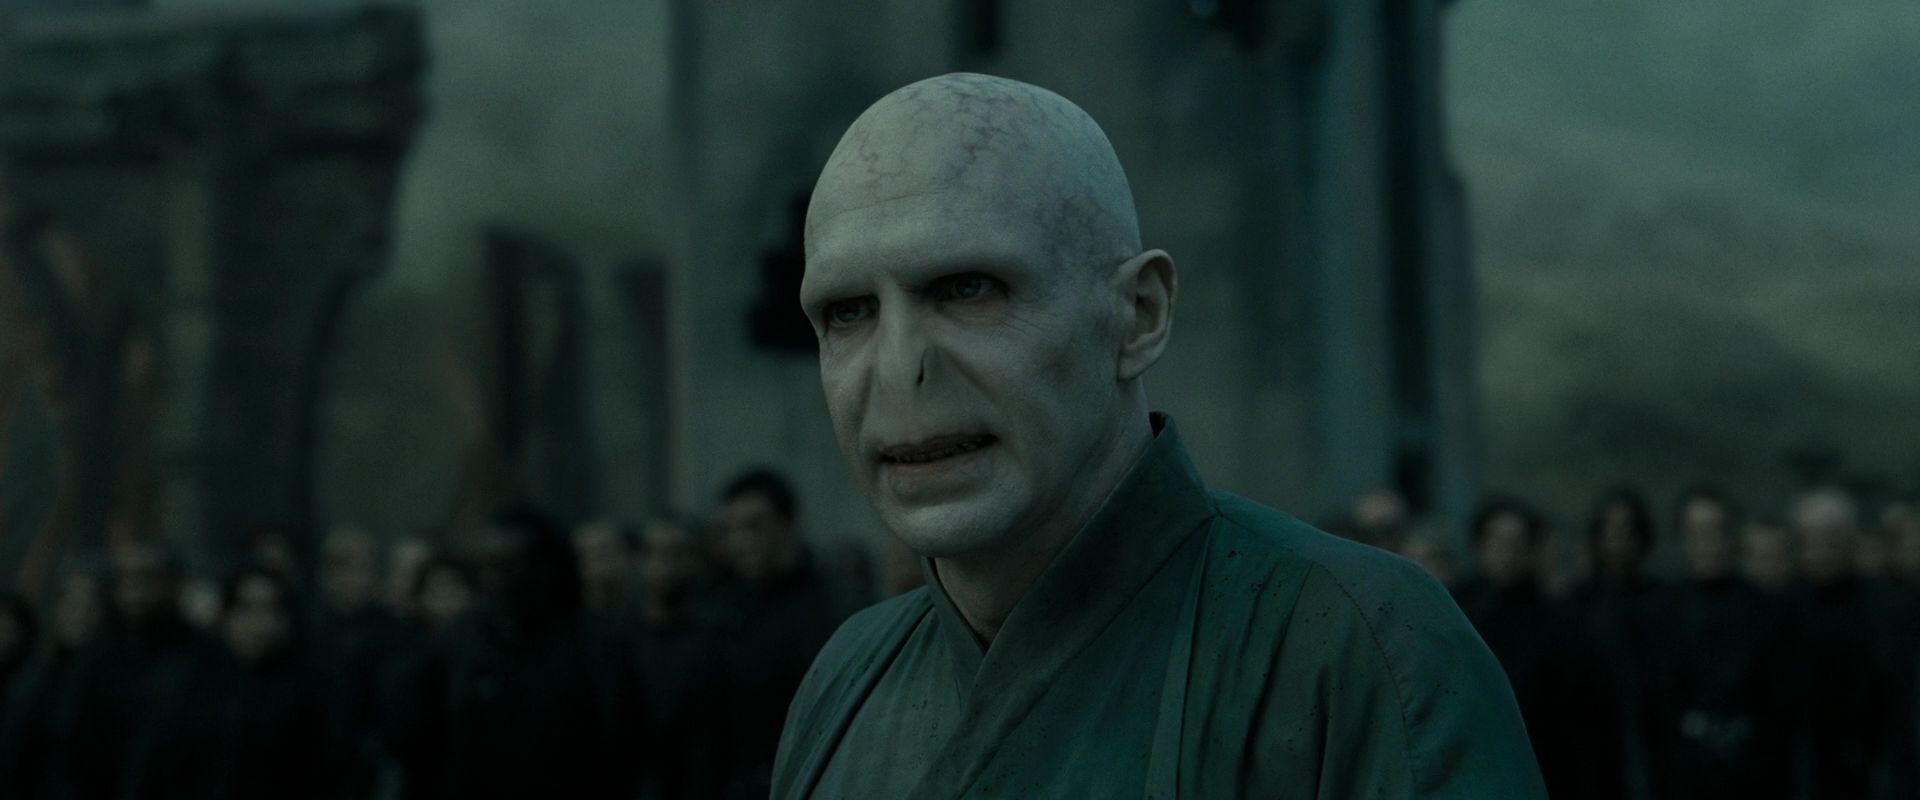 Lord Voldemort images HP DH part 2 HD wallpaper and background photos